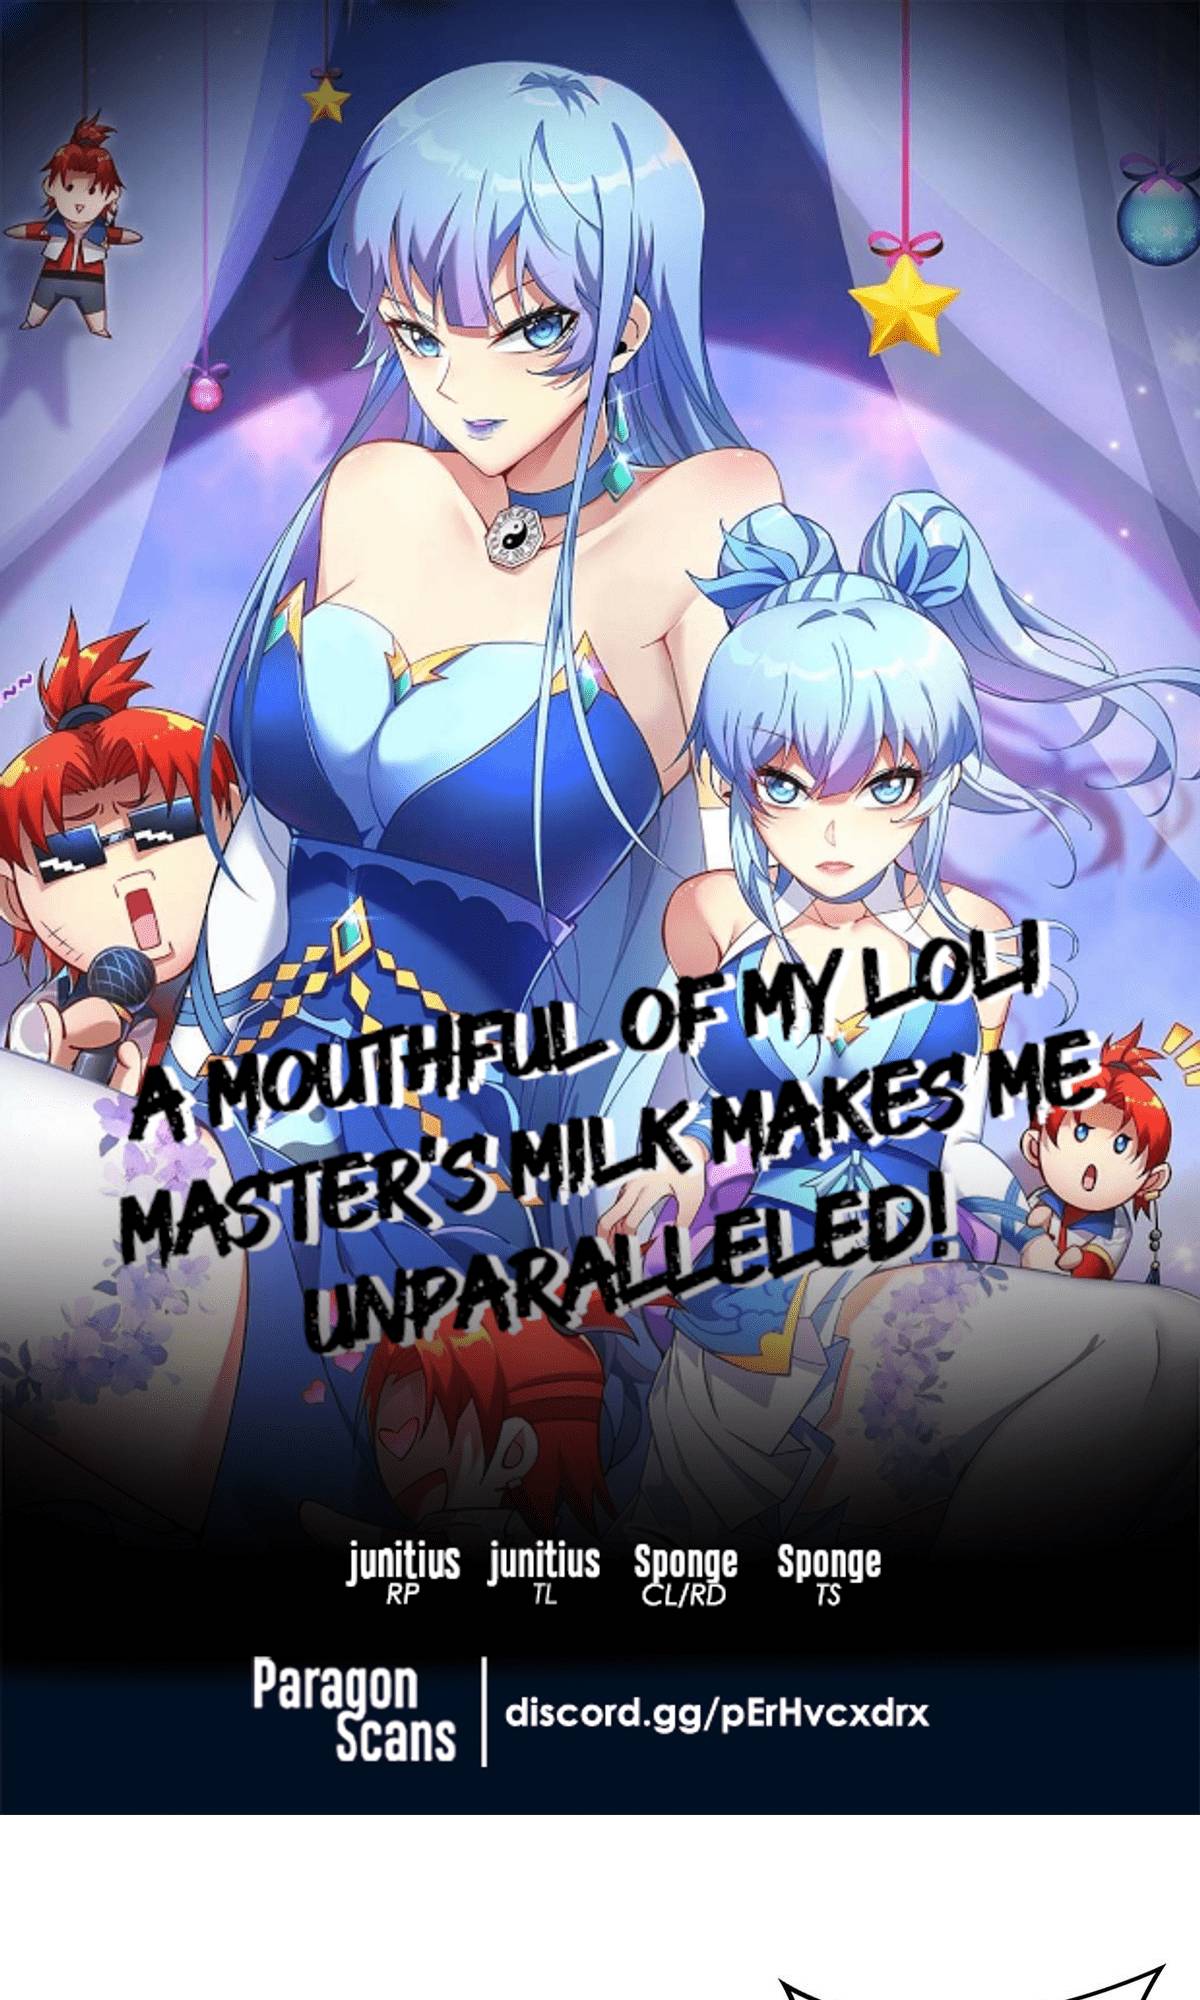 A Mouthful Of My Loli Master's Milk Makes Me Unparalleled - chapter 15 - #1